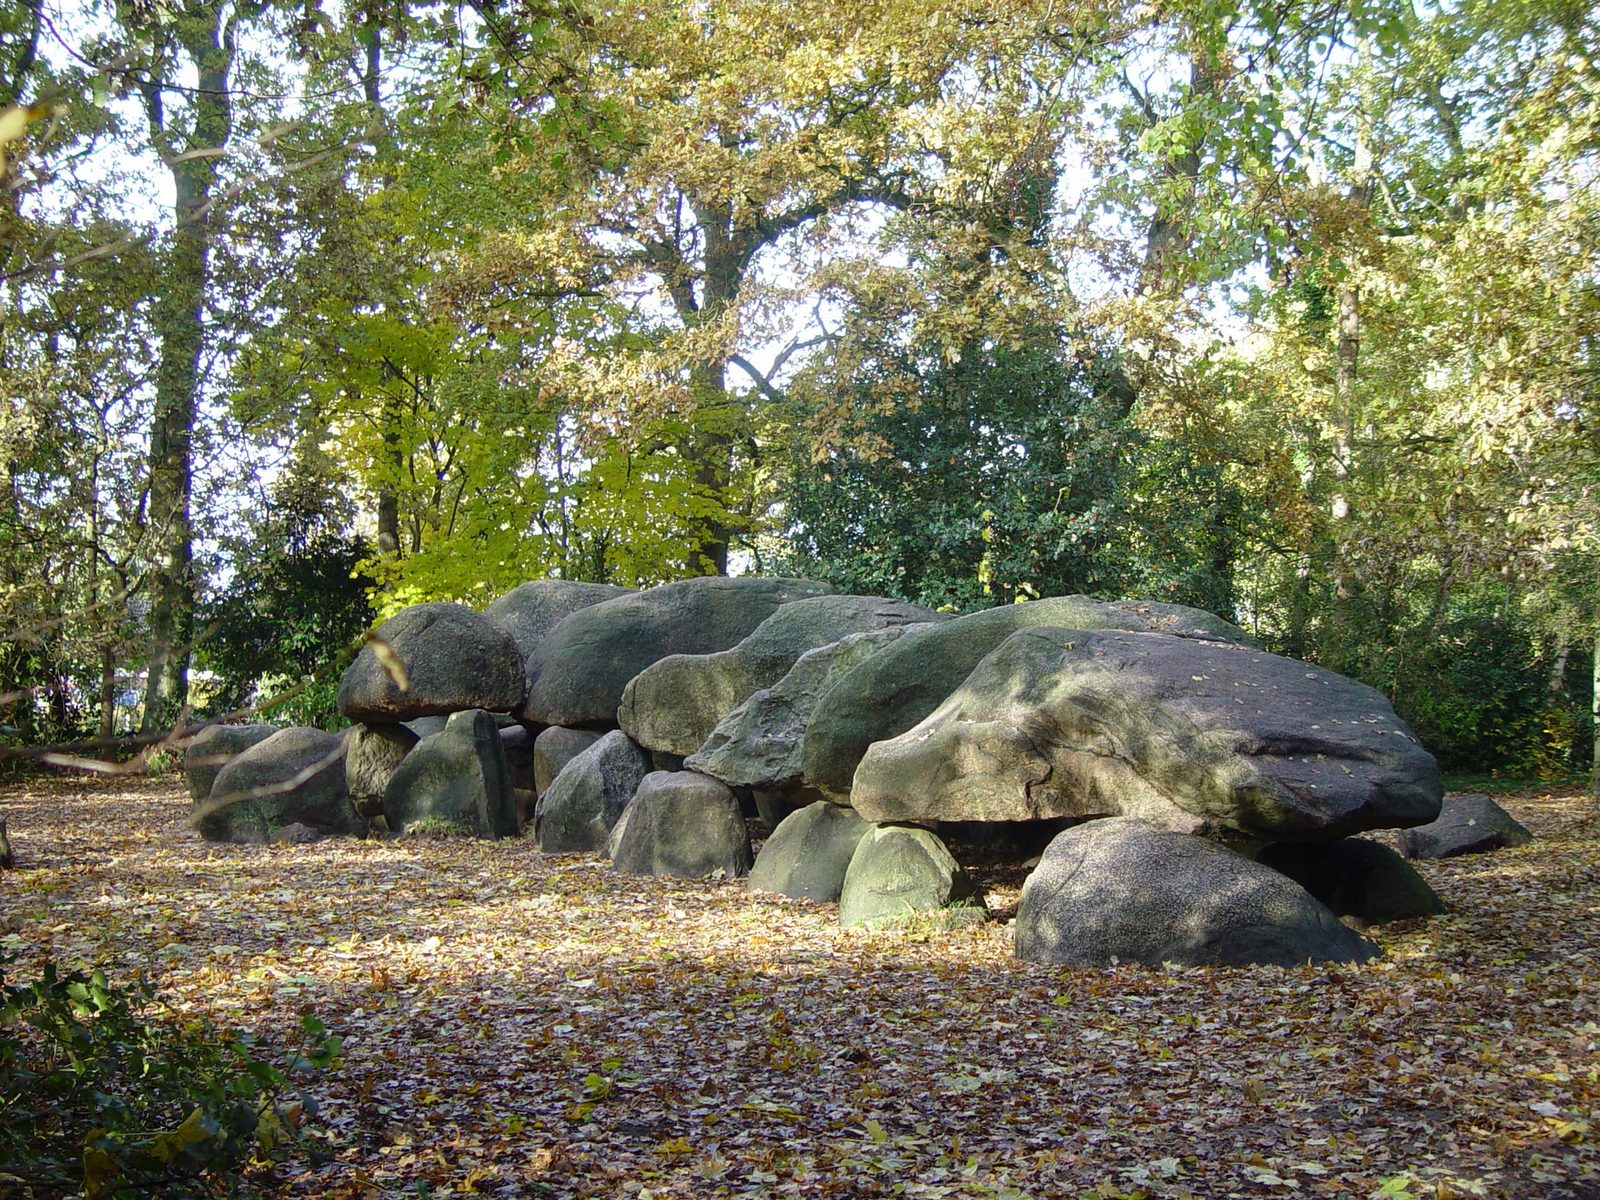 Discover the surroundings of Drenthe